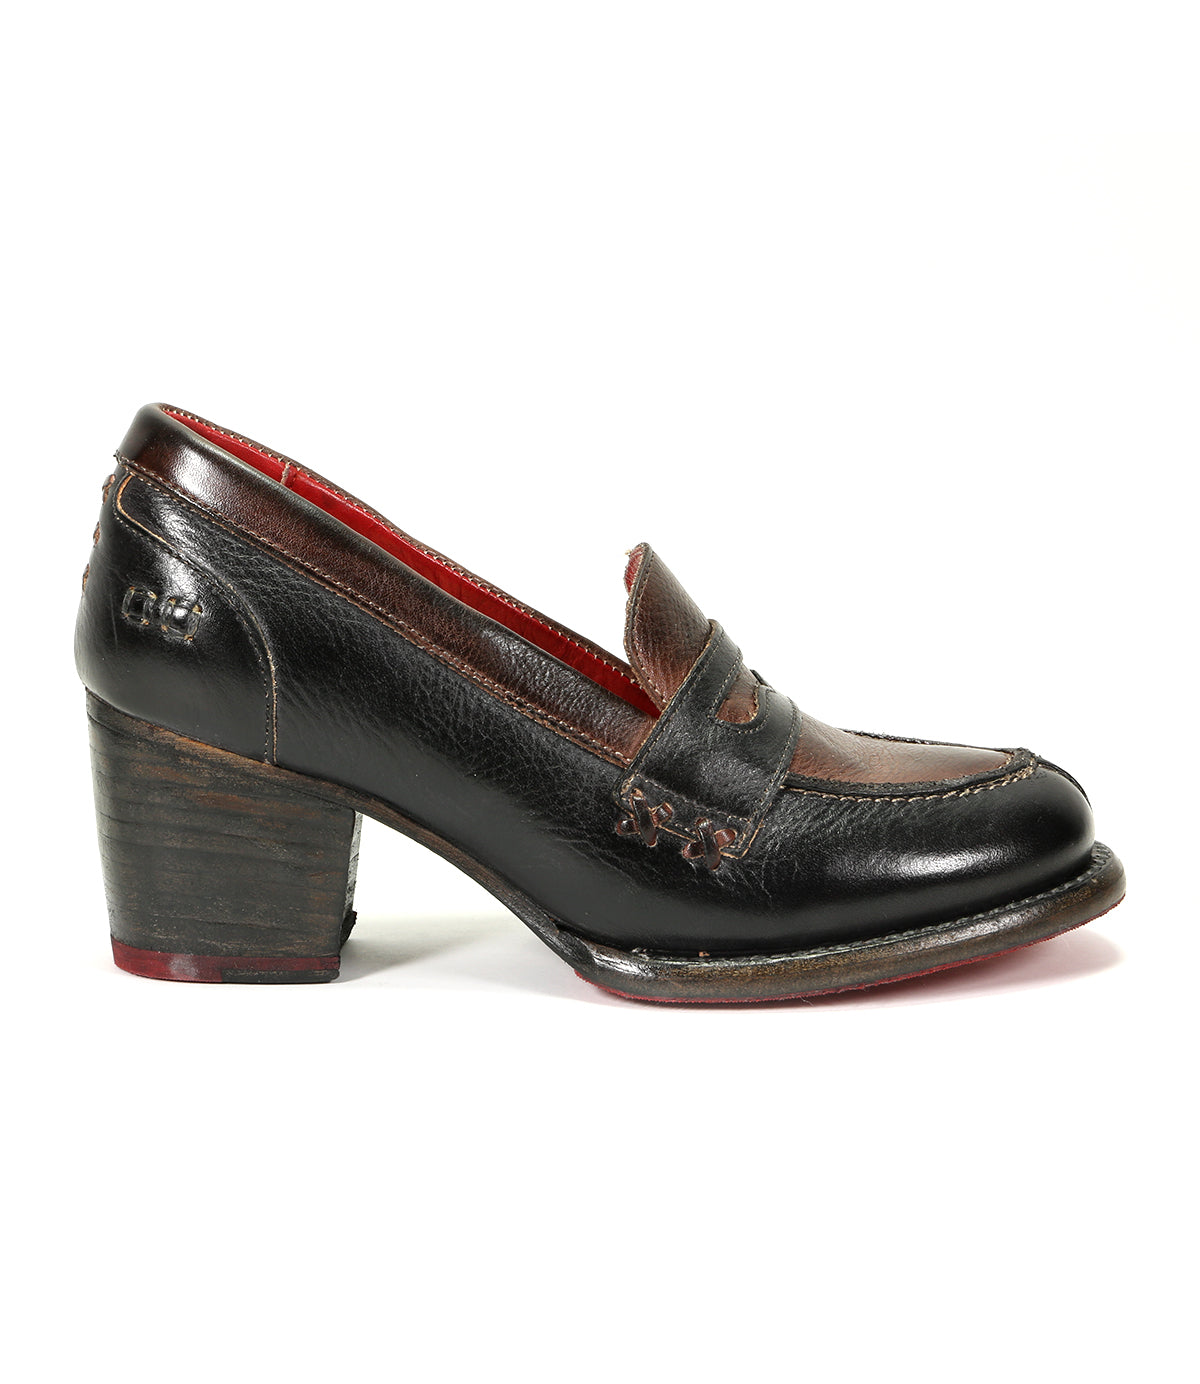 Elevate your office shoe game with this sophisticated Liberty by Bed Stu women's black and red loafer featuring a stylish wooden heel.